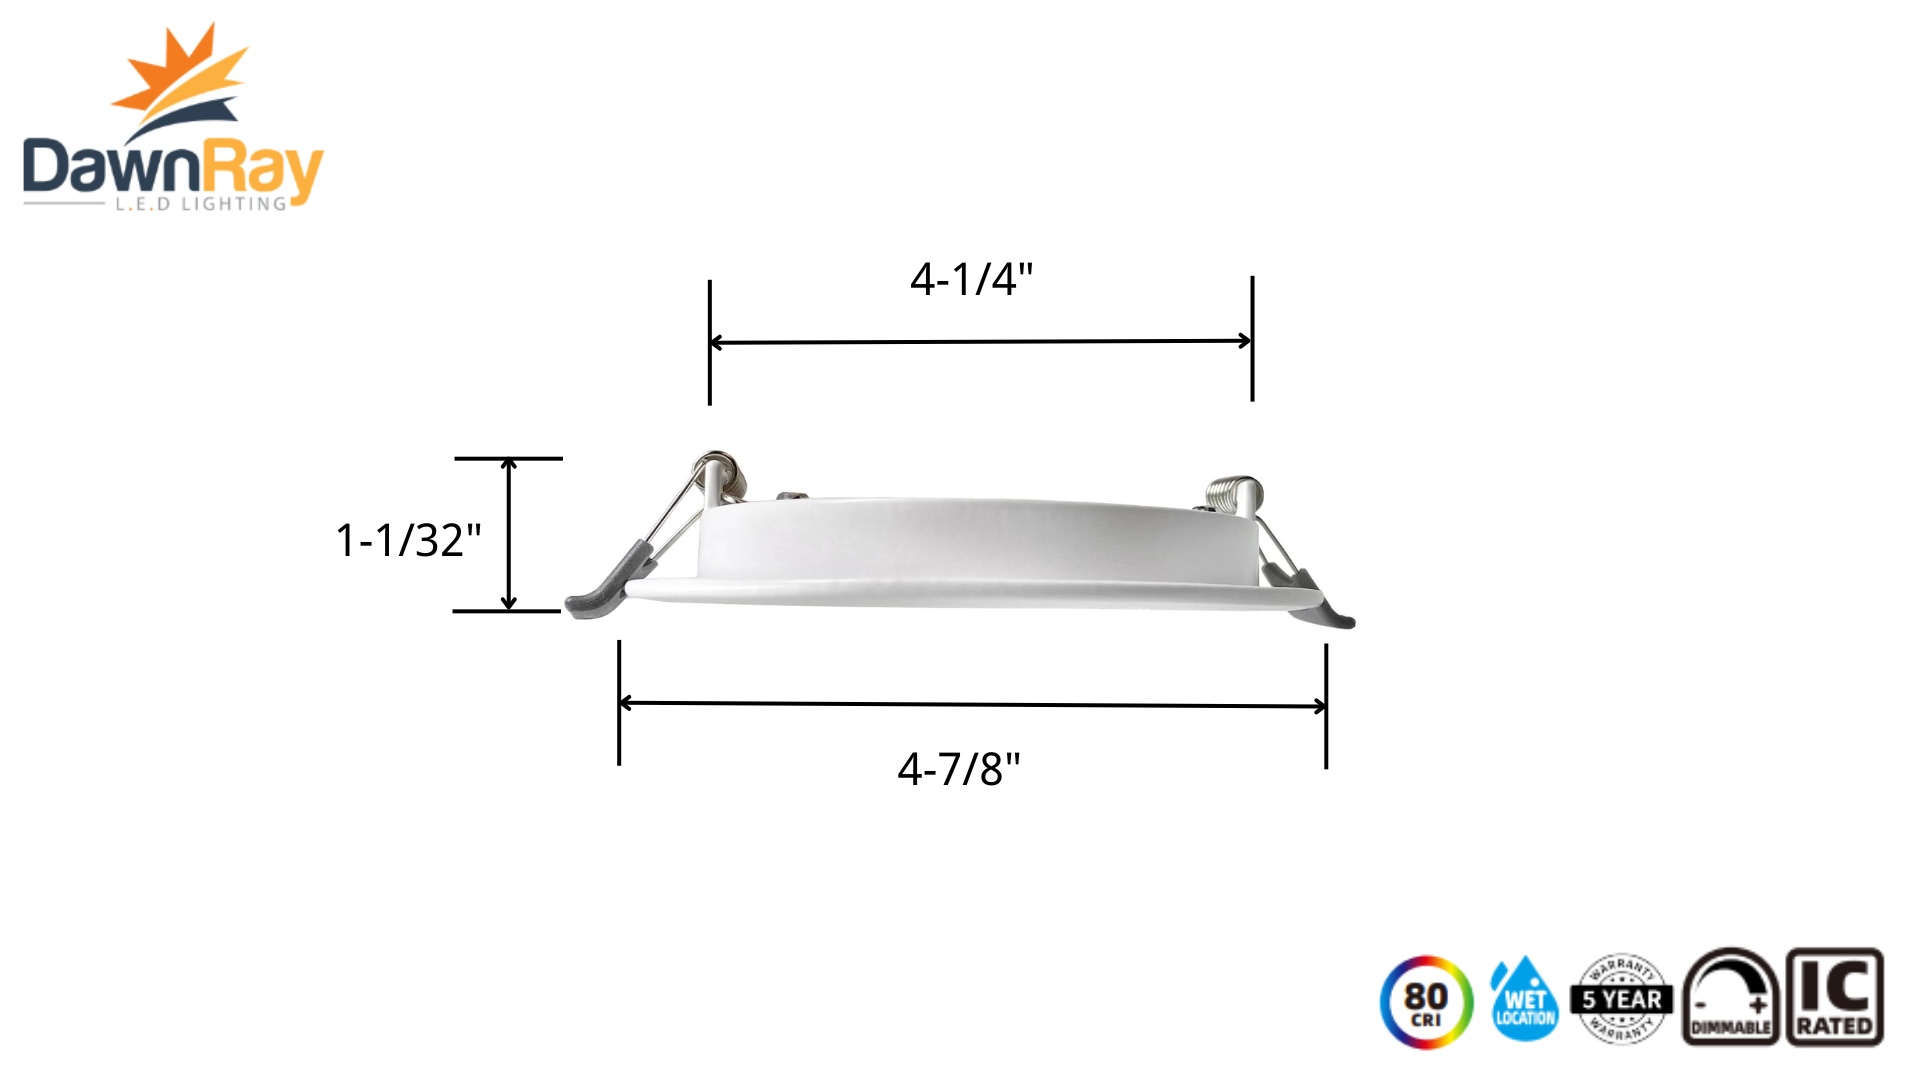 Dawnray 4" Flat Potlight 3CCT, 6 Pieces Contractor Pack, 3000K/4000K/5000K Colors Switchable,  White Finish, 10W, 700Lm, Wetlocation, cETLus